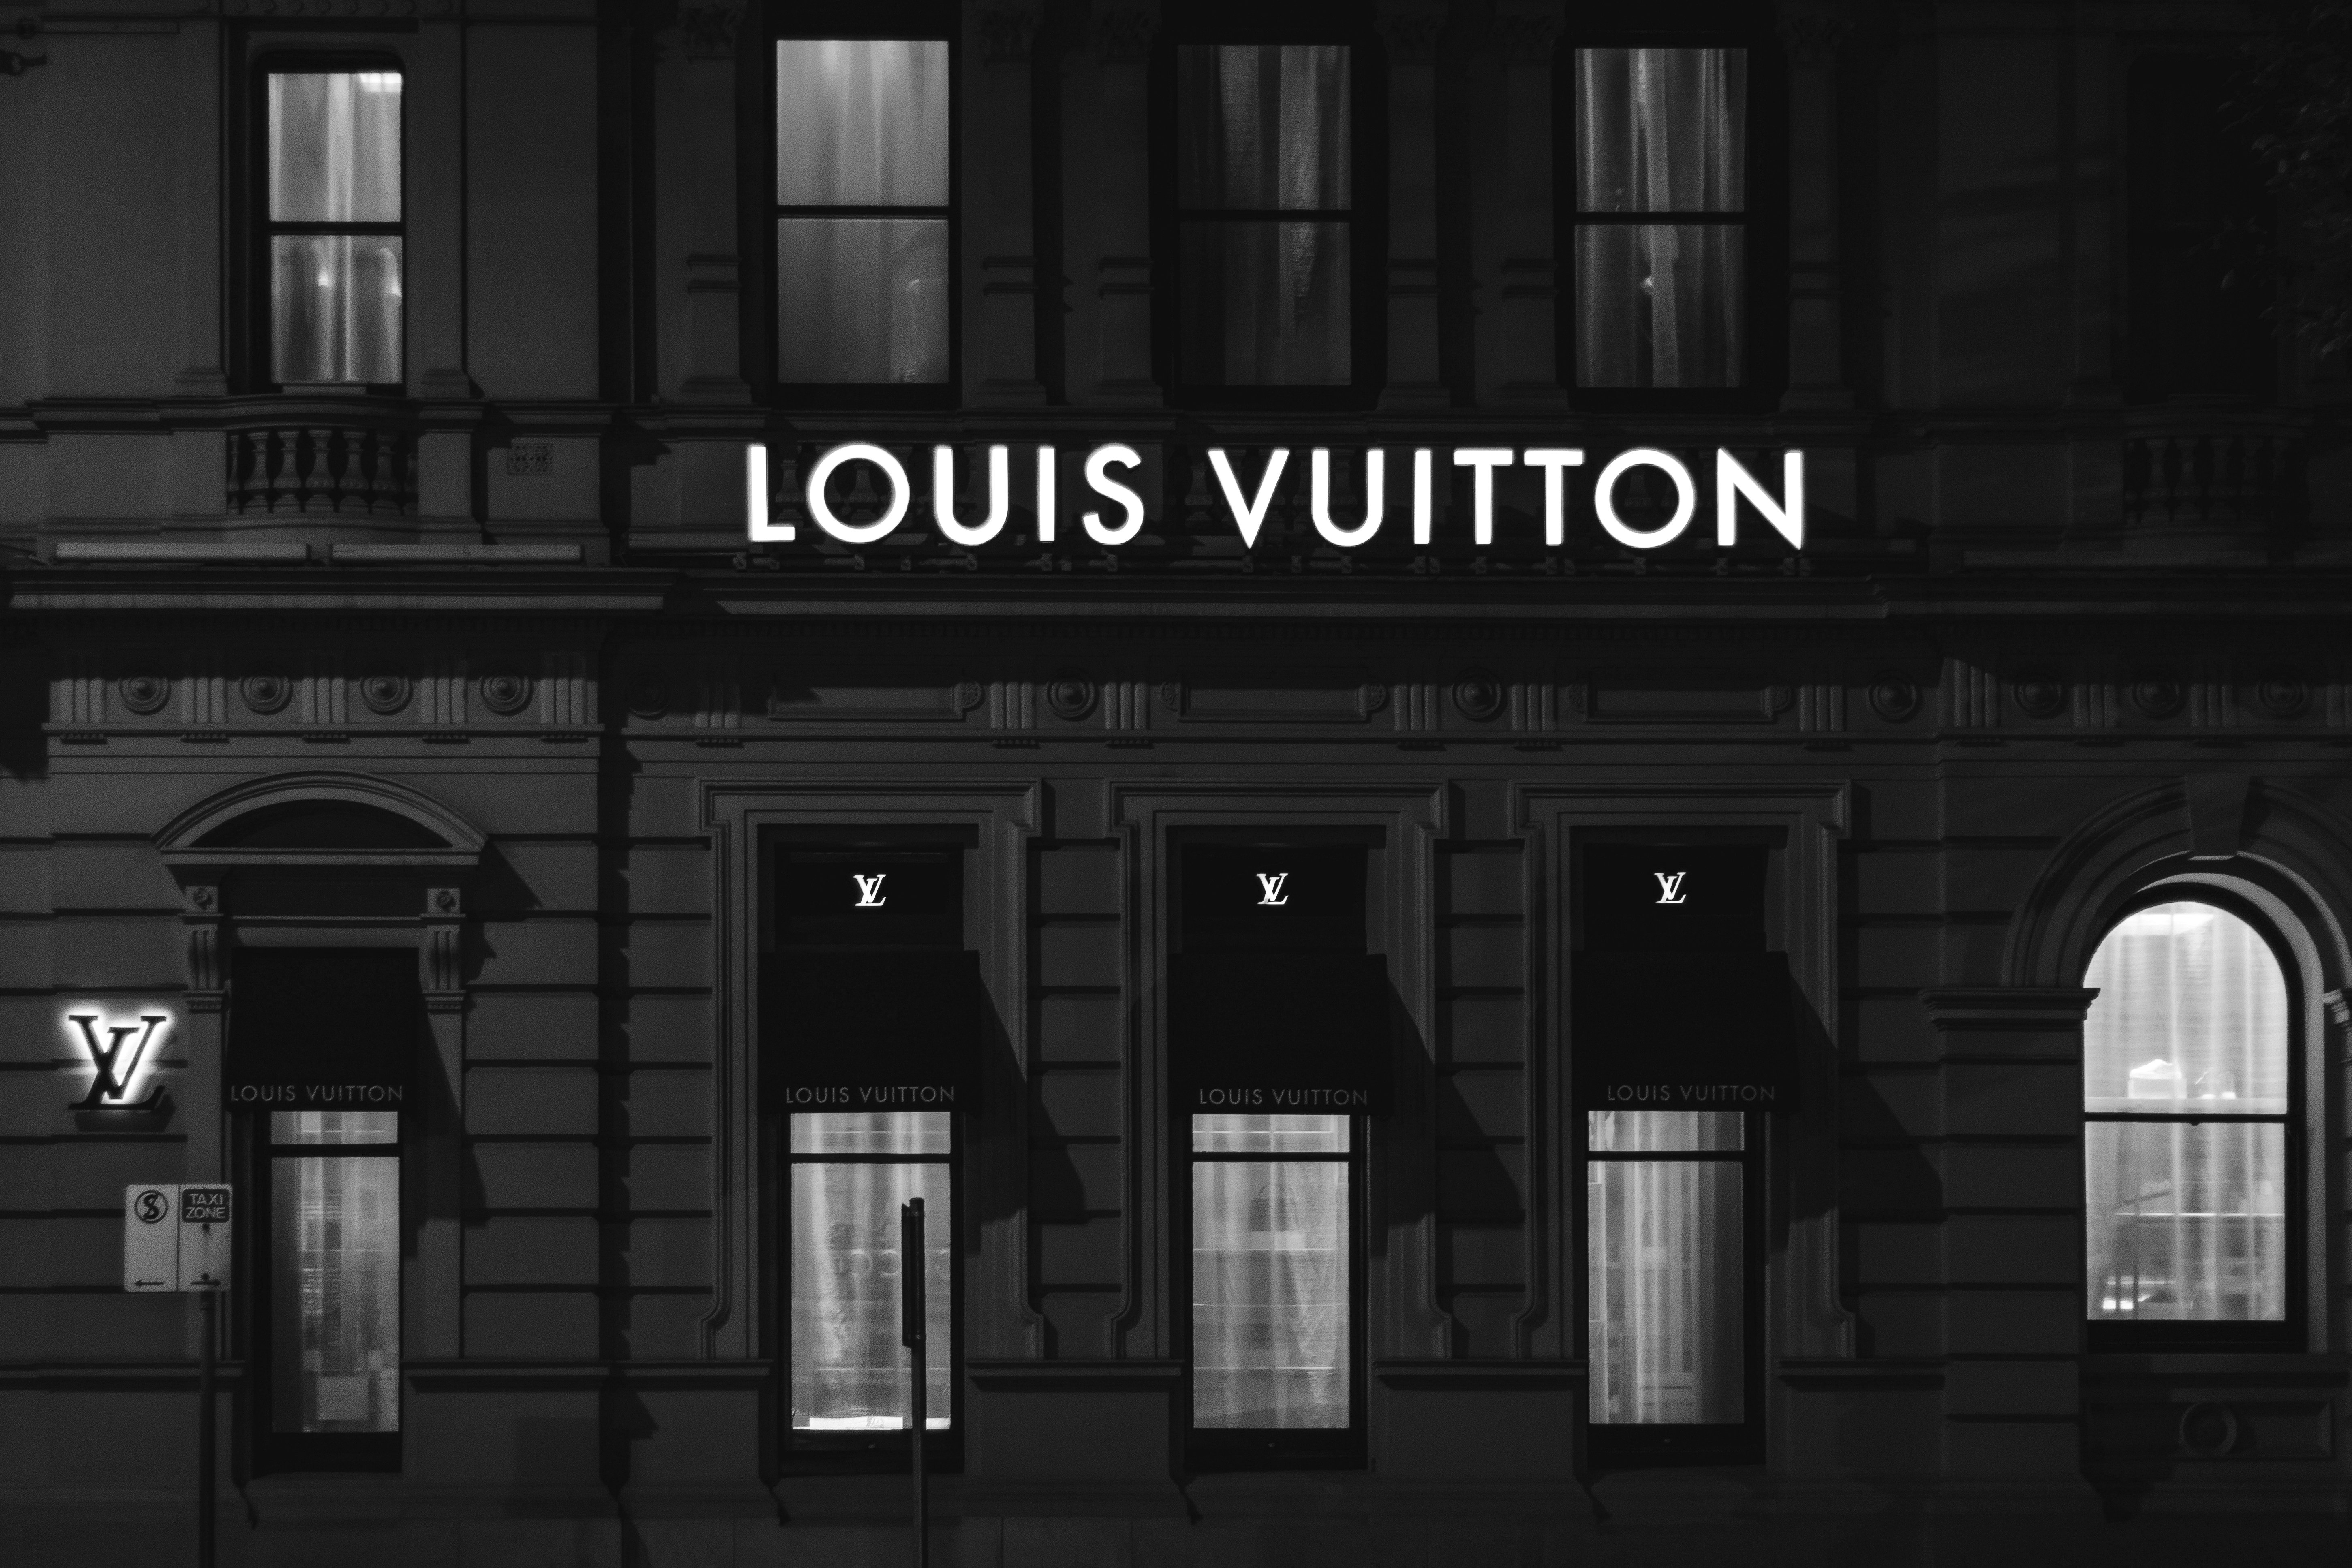 Louis Vuitton takes an L in trade marks battle